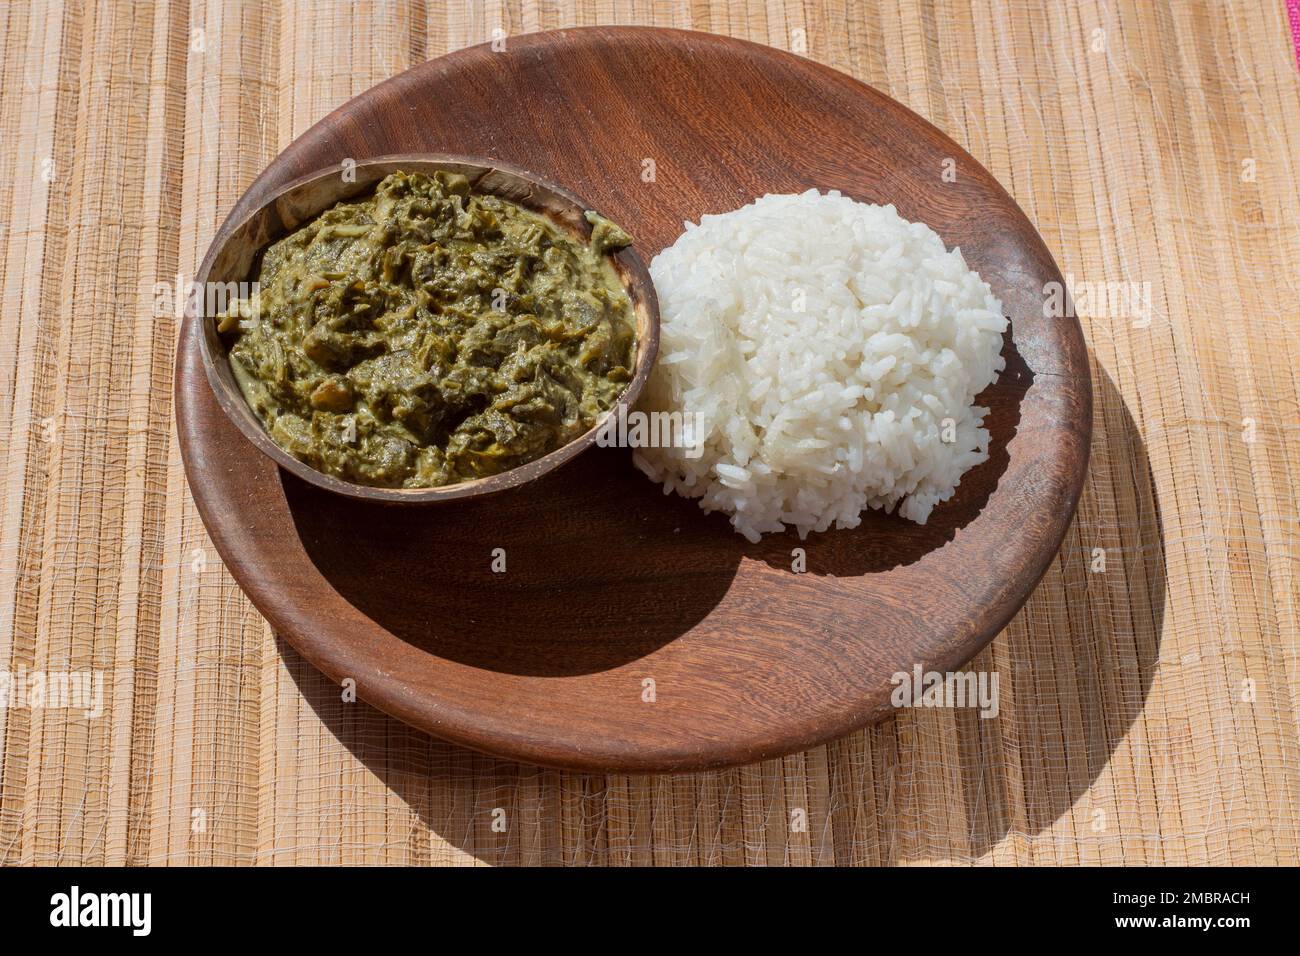 Cowpea leaves stew, a traditional African delicacy made with cow pea leaves, coconut milk, and peanut flour, served over a bed of fluffy white rice Stock Photo